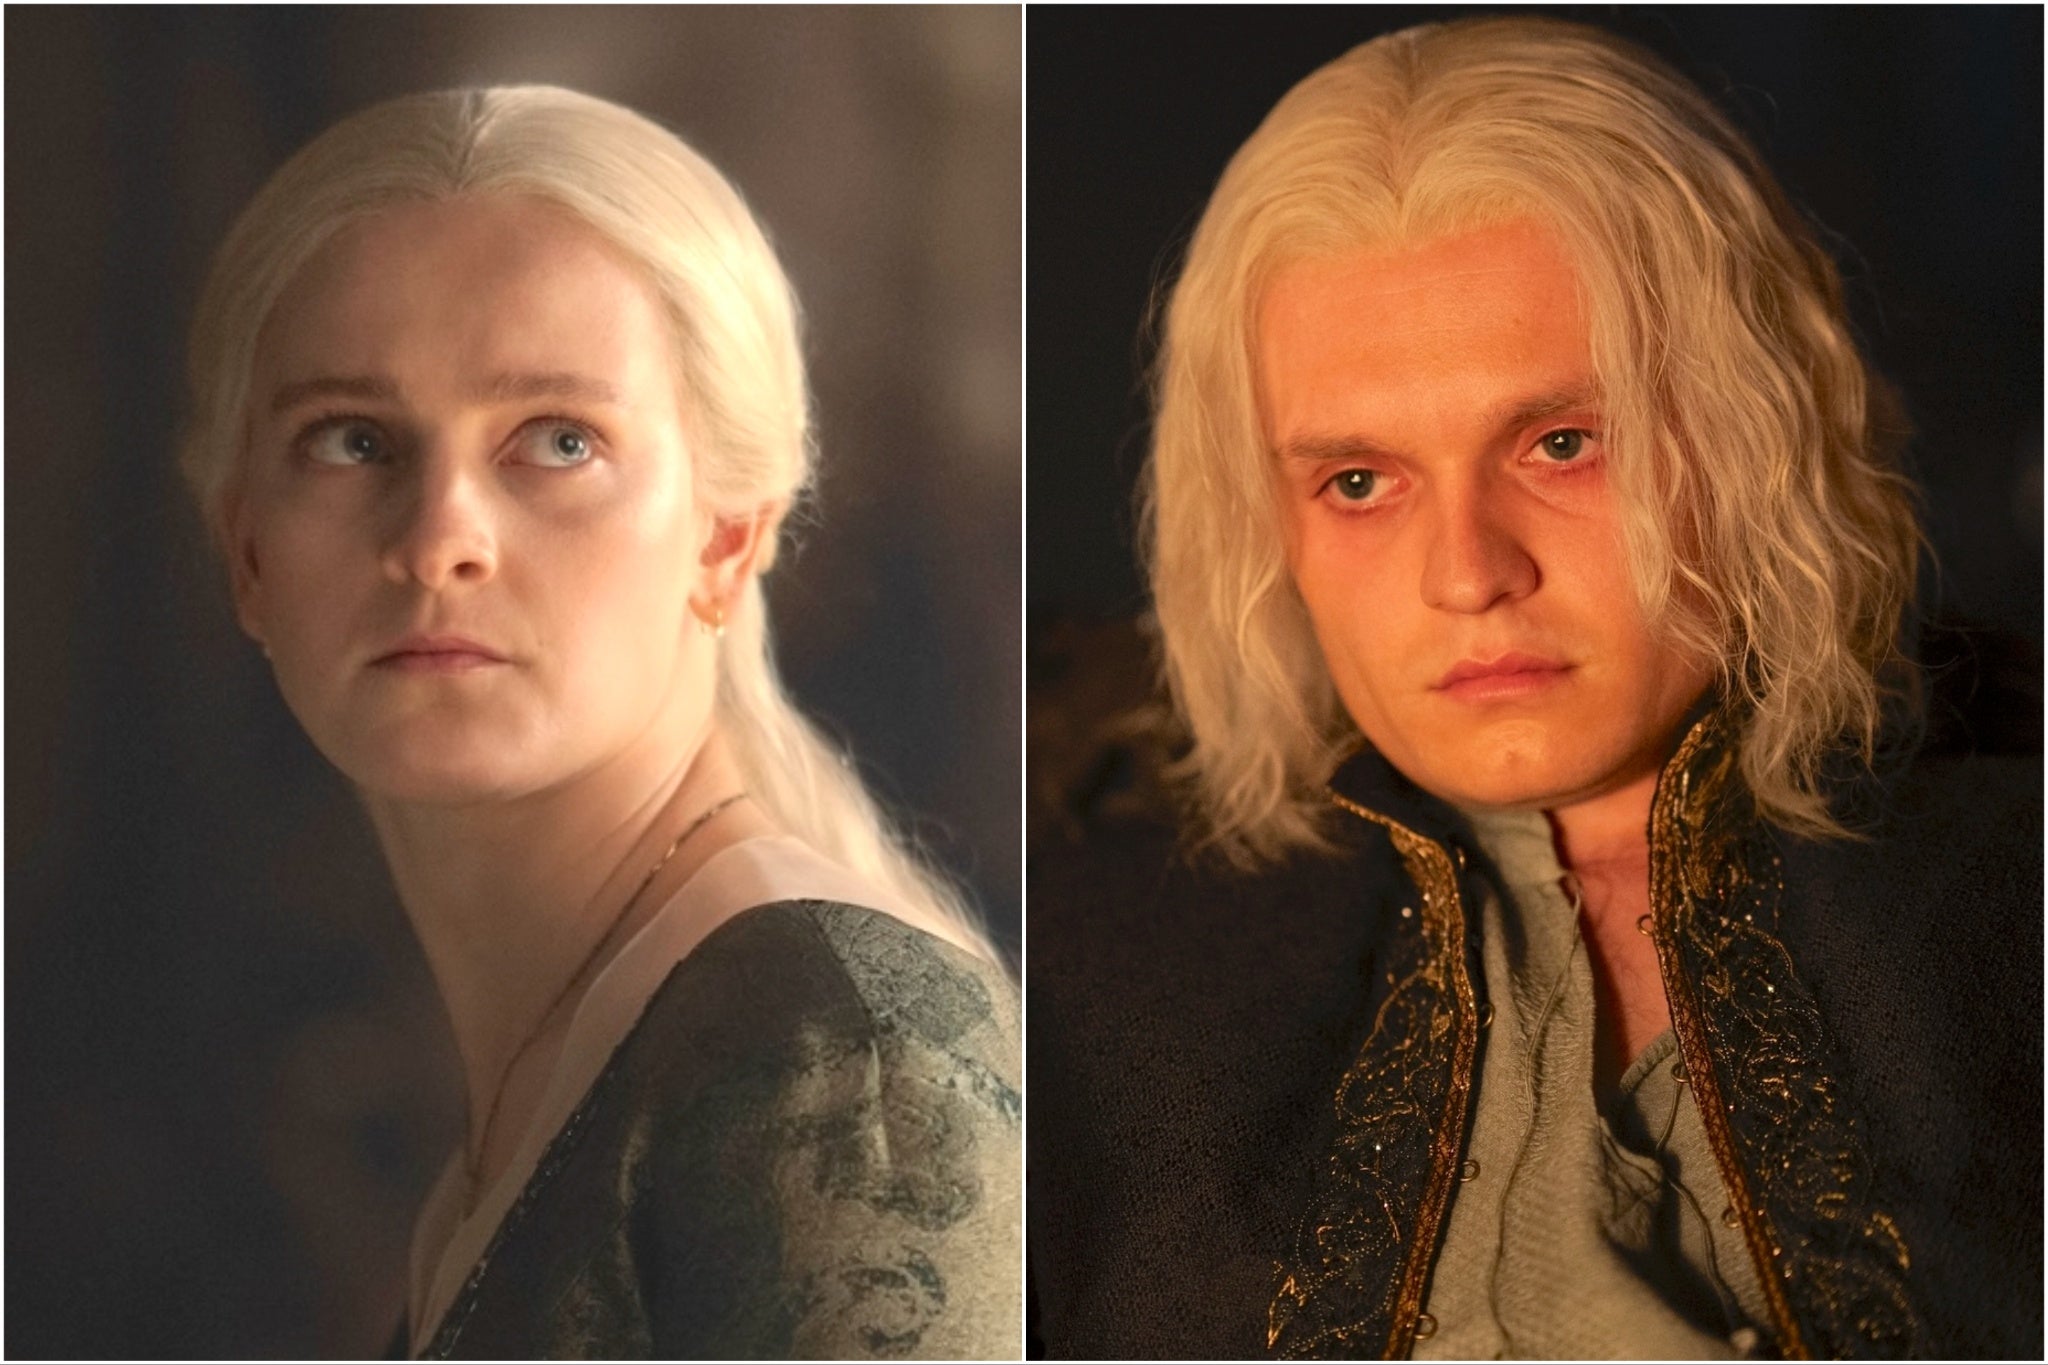 house of the dragon, olivia cooke, matt smith, rhaenyra targaryen, house of the dragon’s aegon star on episode one scene that will ‘split’ viewers